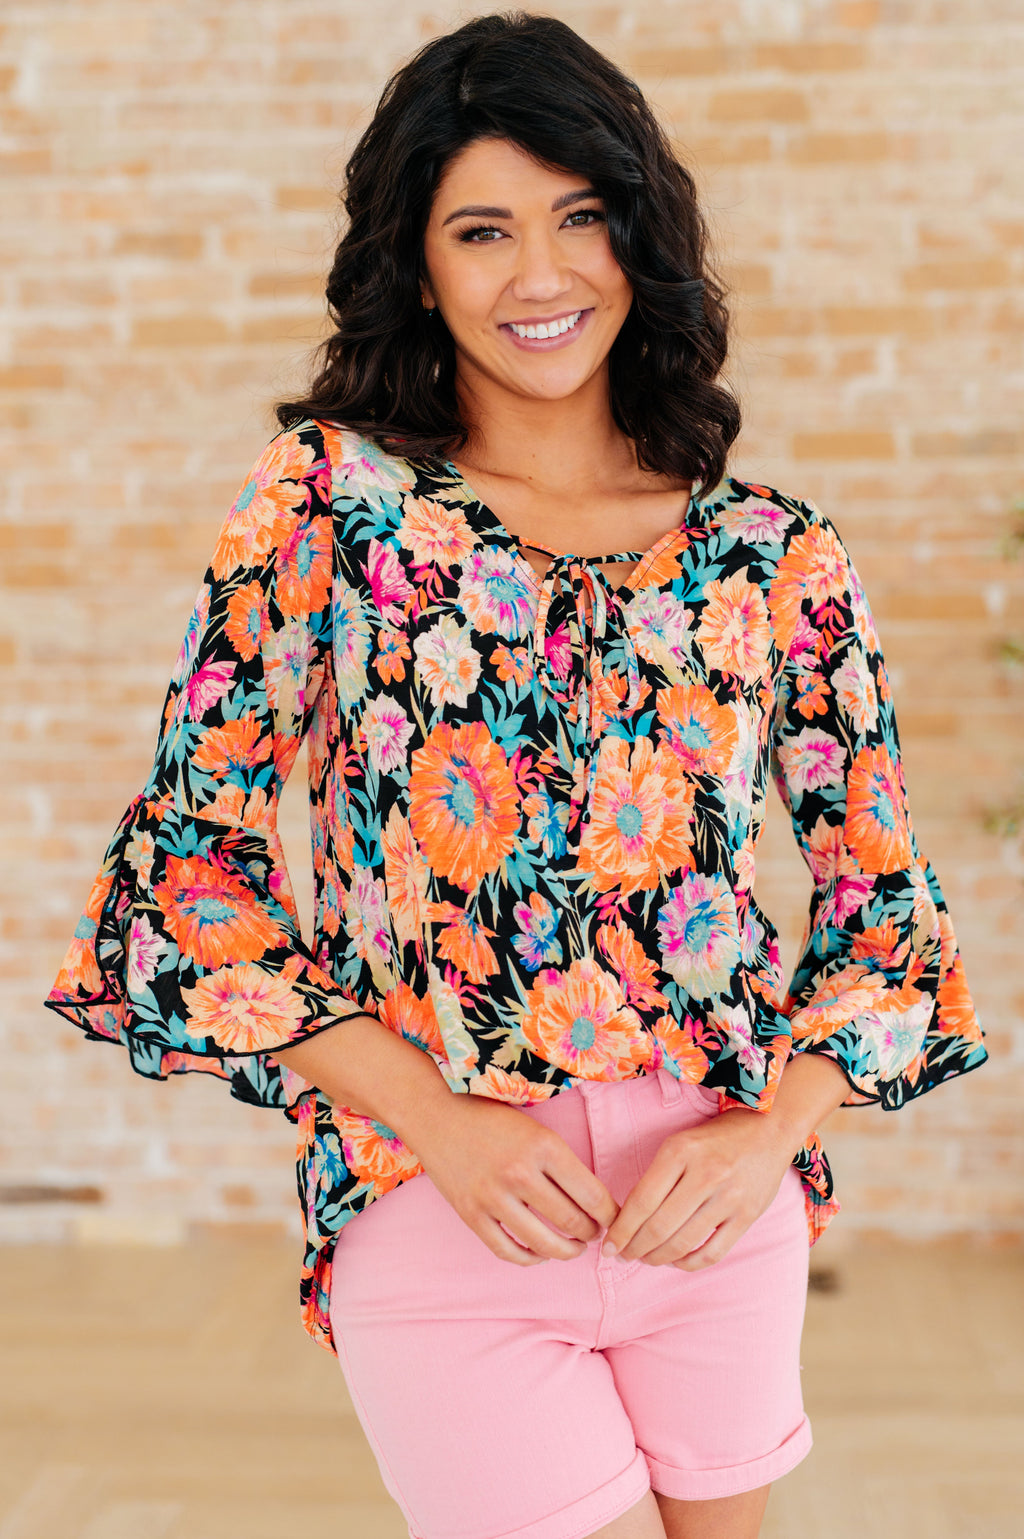 Hazel Blues® |  Willow Bell Sleeve Top in Black and Persimmon Floral